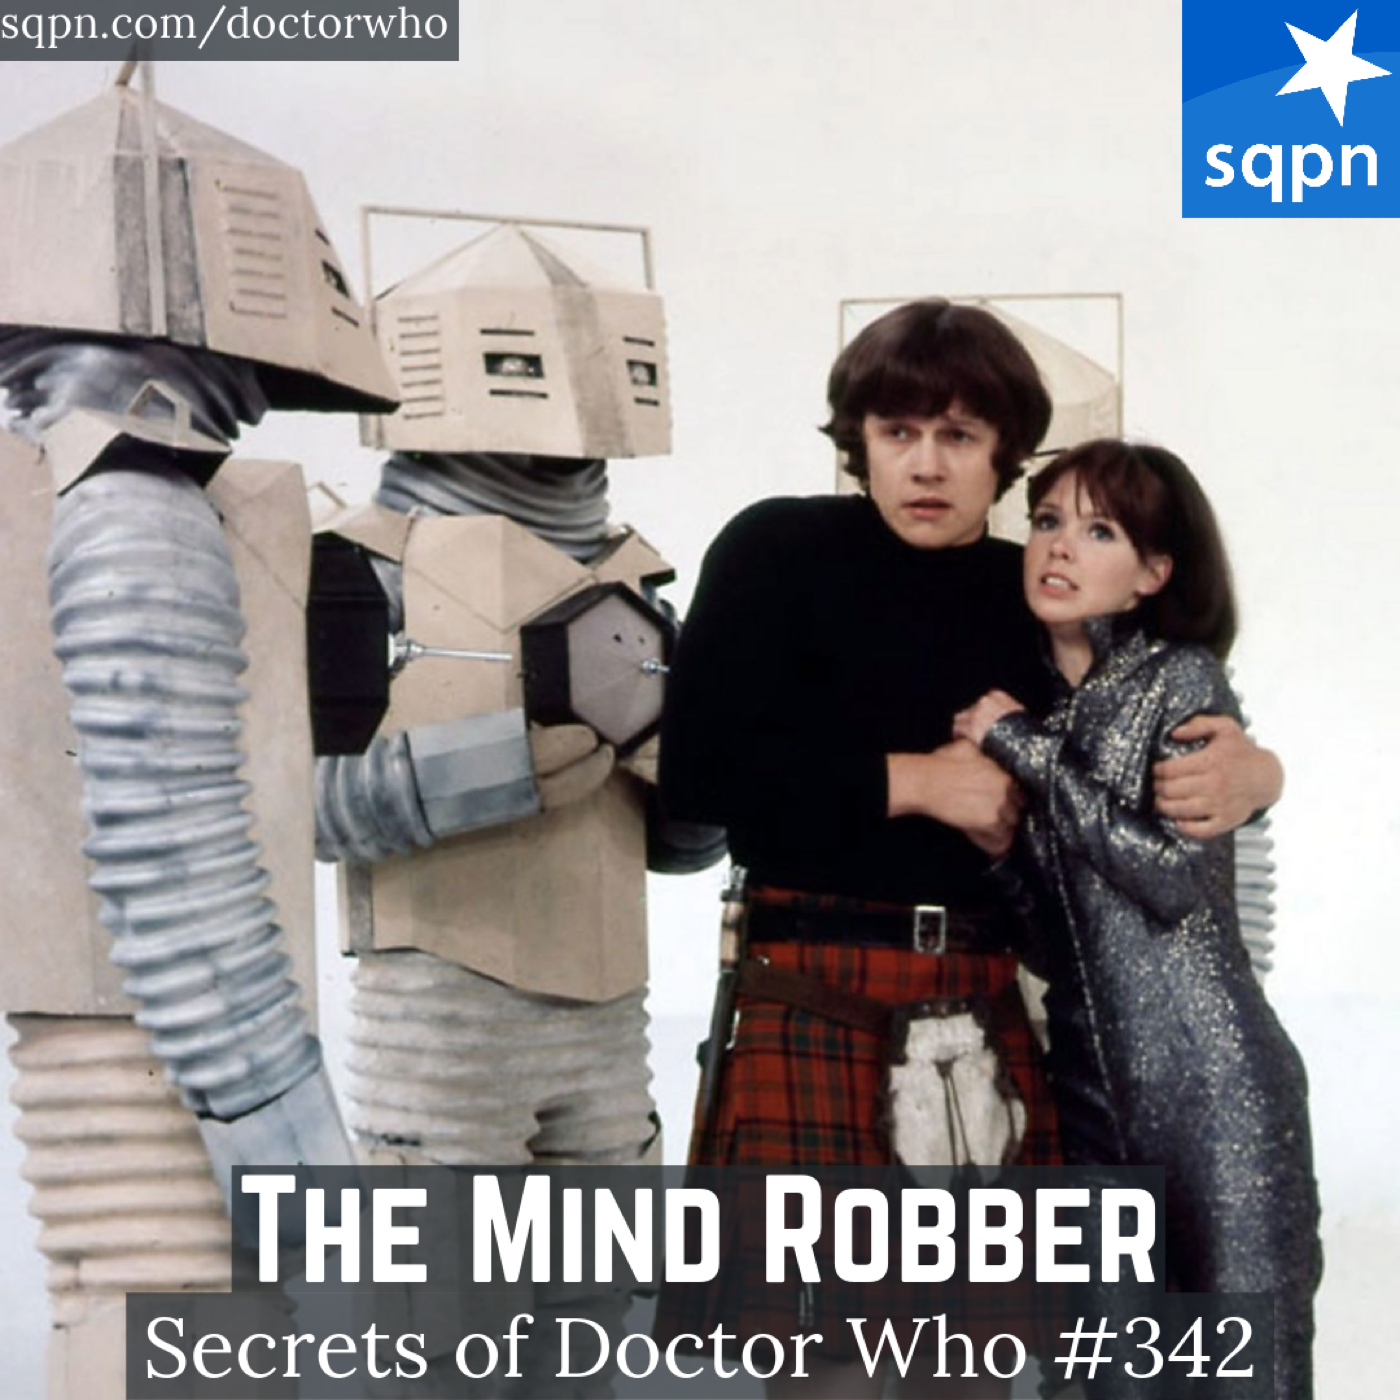 The Mind Robber